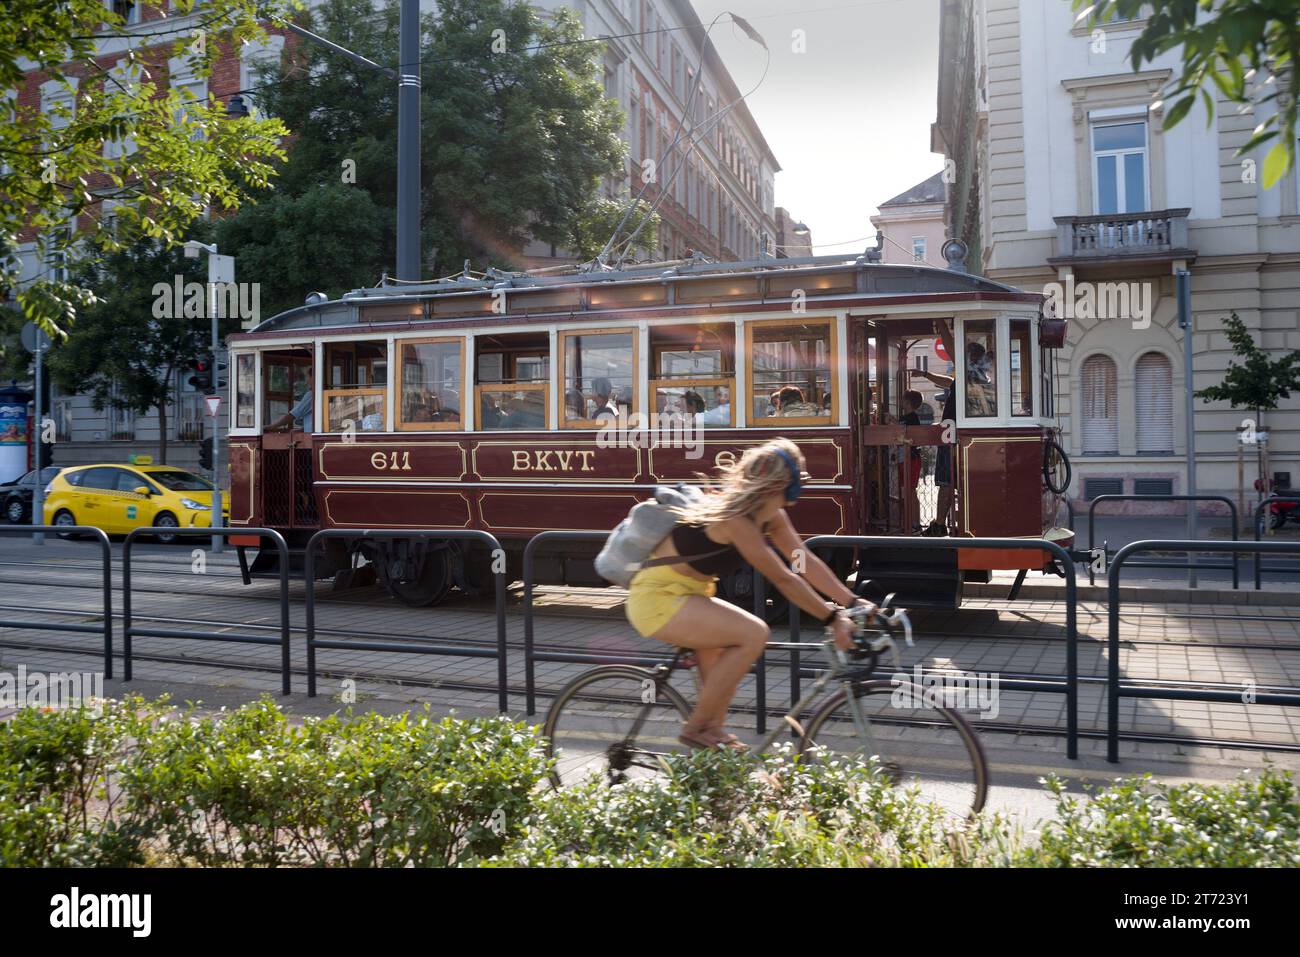 Vintage tram and bicyclist on a street Stock Photo